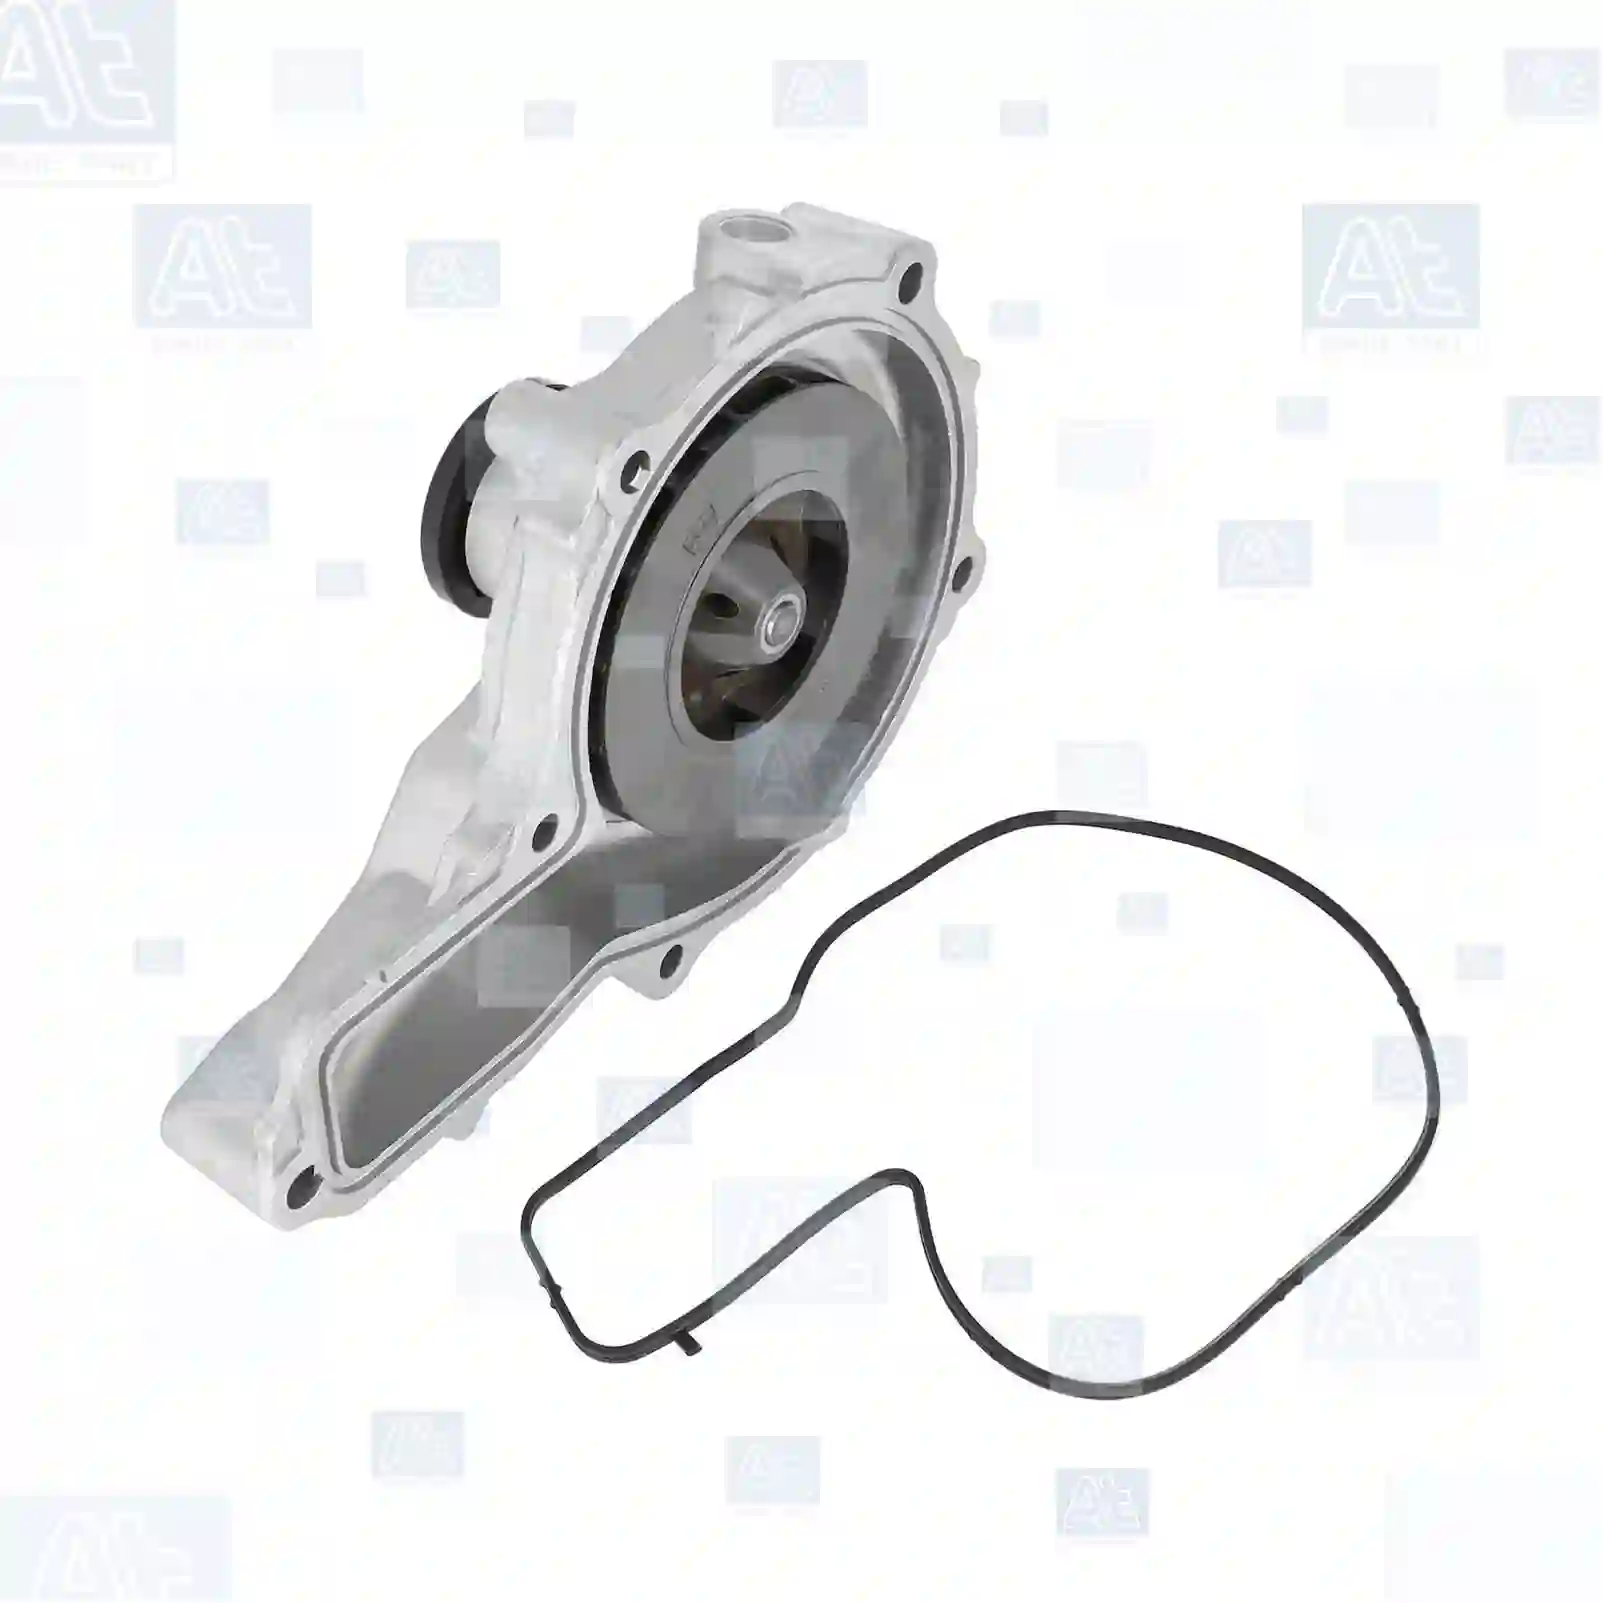 Water pump, without pulley, 77707128, 20744944, 21228795, 21468472, 22195450, 85003160, 85003709, 7420744939, 7420744940, 7421615952, 7422167707, 7422197707, 7485000763, 7485013068, 20451516, 20464403, 20538820, 20538845, 20744939, 20744940, 21221878, 21228793, 21468471, 21615952, 2201101, 22195450, 22197705, 22902431, 3161436, 3801102, 3801418, 3801484, 3803844, 3803930, 85000062, 85000347, 85000486, 85003125, 85003708, 85006062, 85020085, 85021450, ZG00771-0008 ||  77707128 At Spare Part | Engine, Accelerator Pedal, Camshaft, Connecting Rod, Crankcase, Crankshaft, Cylinder Head, Engine Suspension Mountings, Exhaust Manifold, Exhaust Gas Recirculation, Filter Kits, Flywheel Housing, General Overhaul Kits, Engine, Intake Manifold, Oil Cleaner, Oil Cooler, Oil Filter, Oil Pump, Oil Sump, Piston & Liner, Sensor & Switch, Timing Case, Turbocharger, Cooling System, Belt Tensioner, Coolant Filter, Coolant Pipe, Corrosion Prevention Agent, Drive, Expansion Tank, Fan, Intercooler, Monitors & Gauges, Radiator, Thermostat, V-Belt / Timing belt, Water Pump, Fuel System, Electronical Injector Unit, Feed Pump, Fuel Filter, cpl., Fuel Gauge Sender,  Fuel Line, Fuel Pump, Fuel Tank, Injection Line Kit, Injection Pump, Exhaust System, Clutch & Pedal, Gearbox, Propeller Shaft, Axles, Brake System, Hubs & Wheels, Suspension, Leaf Spring, Universal Parts / Accessories, Steering, Electrical System, Cabin Water pump, without pulley, 77707128, 20744944, 21228795, 21468472, 22195450, 85003160, 85003709, 7420744939, 7420744940, 7421615952, 7422167707, 7422197707, 7485000763, 7485013068, 20451516, 20464403, 20538820, 20538845, 20744939, 20744940, 21221878, 21228793, 21468471, 21615952, 2201101, 22195450, 22197705, 22902431, 3161436, 3801102, 3801418, 3801484, 3803844, 3803930, 85000062, 85000347, 85000486, 85003125, 85003708, 85006062, 85020085, 85021450, ZG00771-0008 ||  77707128 At Spare Part | Engine, Accelerator Pedal, Camshaft, Connecting Rod, Crankcase, Crankshaft, Cylinder Head, Engine Suspension Mountings, Exhaust Manifold, Exhaust Gas Recirculation, Filter Kits, Flywheel Housing, General Overhaul Kits, Engine, Intake Manifold, Oil Cleaner, Oil Cooler, Oil Filter, Oil Pump, Oil Sump, Piston & Liner, Sensor & Switch, Timing Case, Turbocharger, Cooling System, Belt Tensioner, Coolant Filter, Coolant Pipe, Corrosion Prevention Agent, Drive, Expansion Tank, Fan, Intercooler, Monitors & Gauges, Radiator, Thermostat, V-Belt / Timing belt, Water Pump, Fuel System, Electronical Injector Unit, Feed Pump, Fuel Filter, cpl., Fuel Gauge Sender,  Fuel Line, Fuel Pump, Fuel Tank, Injection Line Kit, Injection Pump, Exhaust System, Clutch & Pedal, Gearbox, Propeller Shaft, Axles, Brake System, Hubs & Wheels, Suspension, Leaf Spring, Universal Parts / Accessories, Steering, Electrical System, Cabin